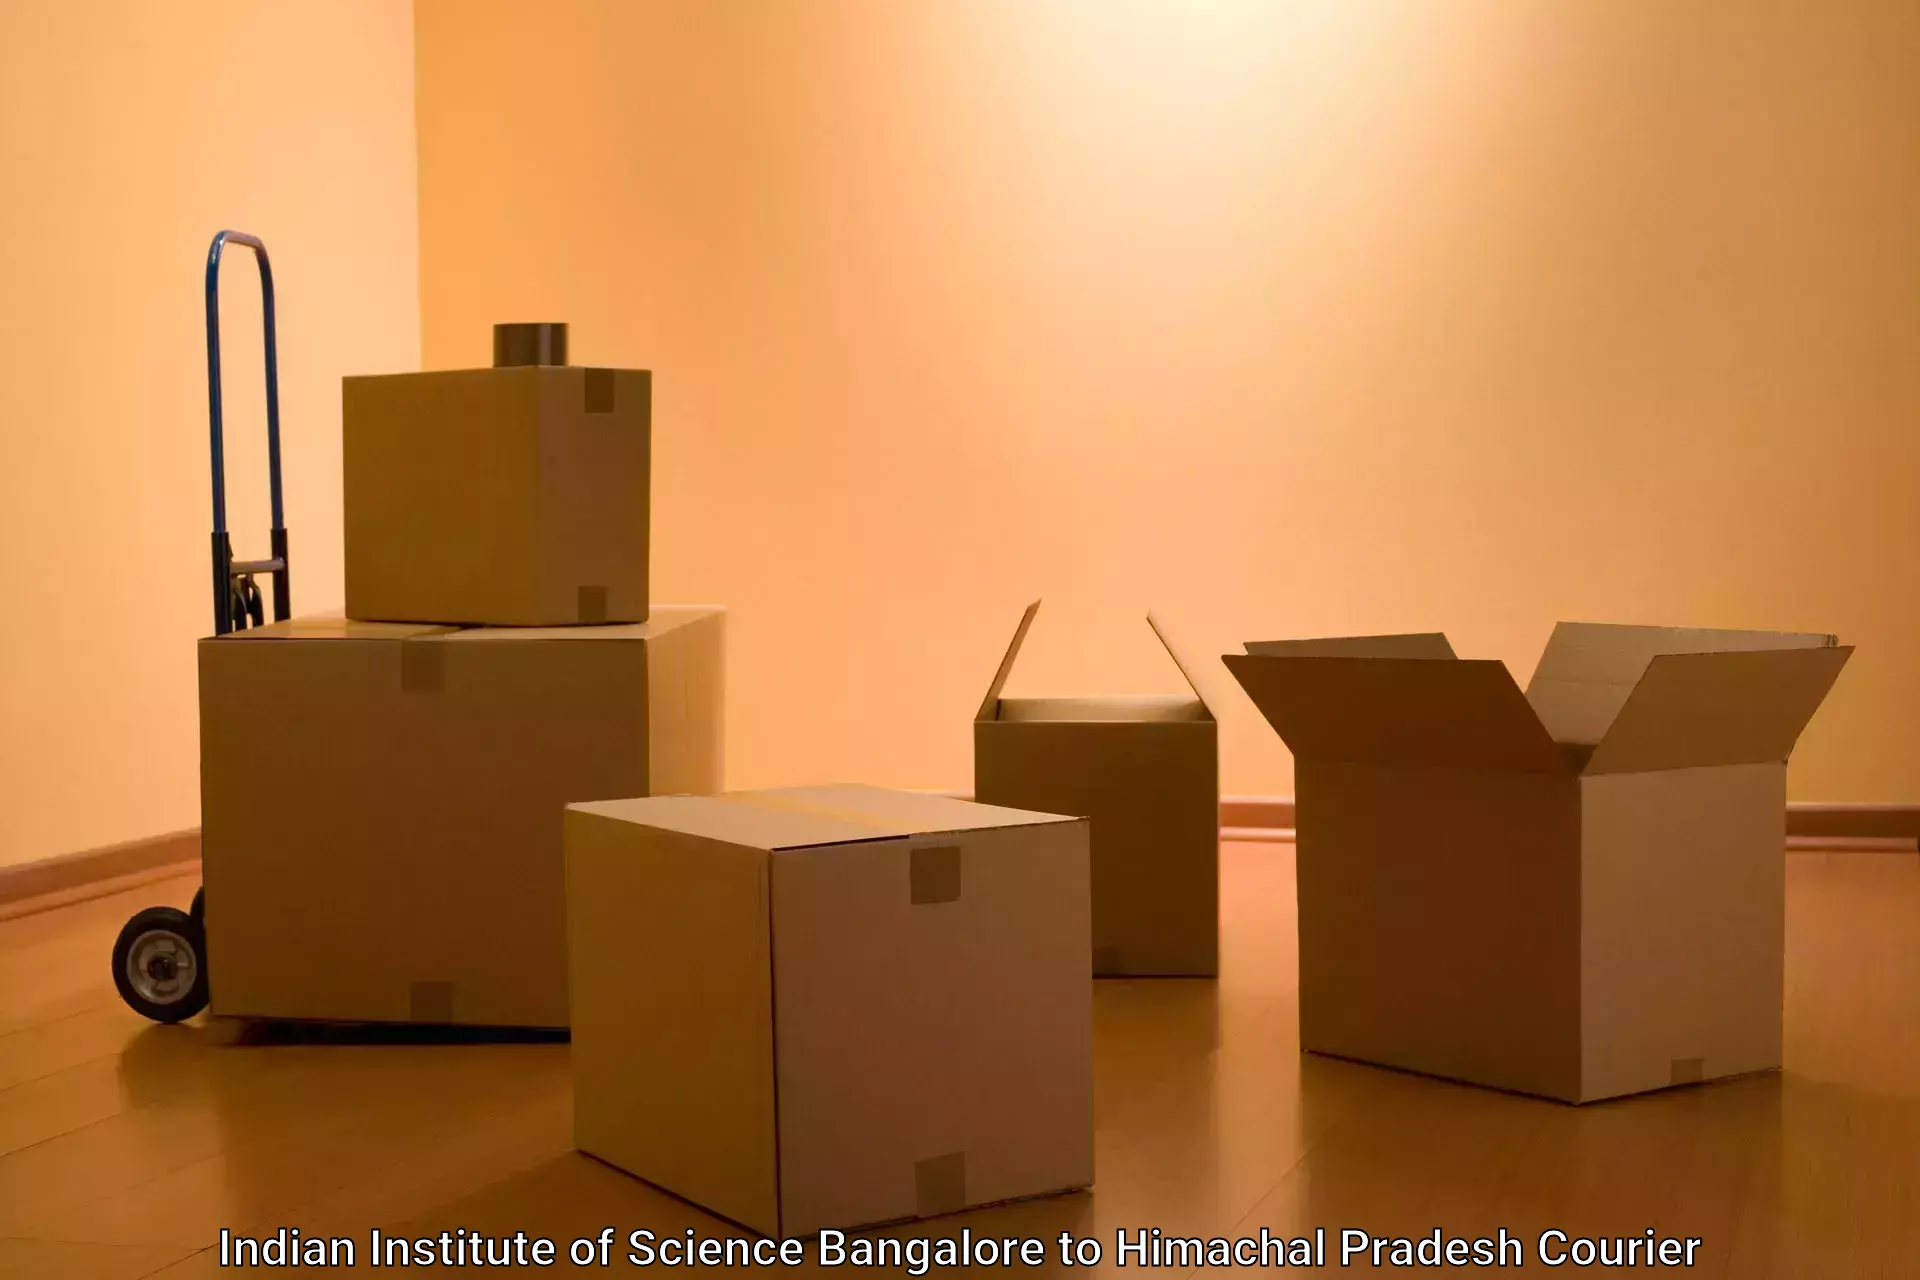 Professional courier services in Indian Institute of Science Bangalore to Sundla